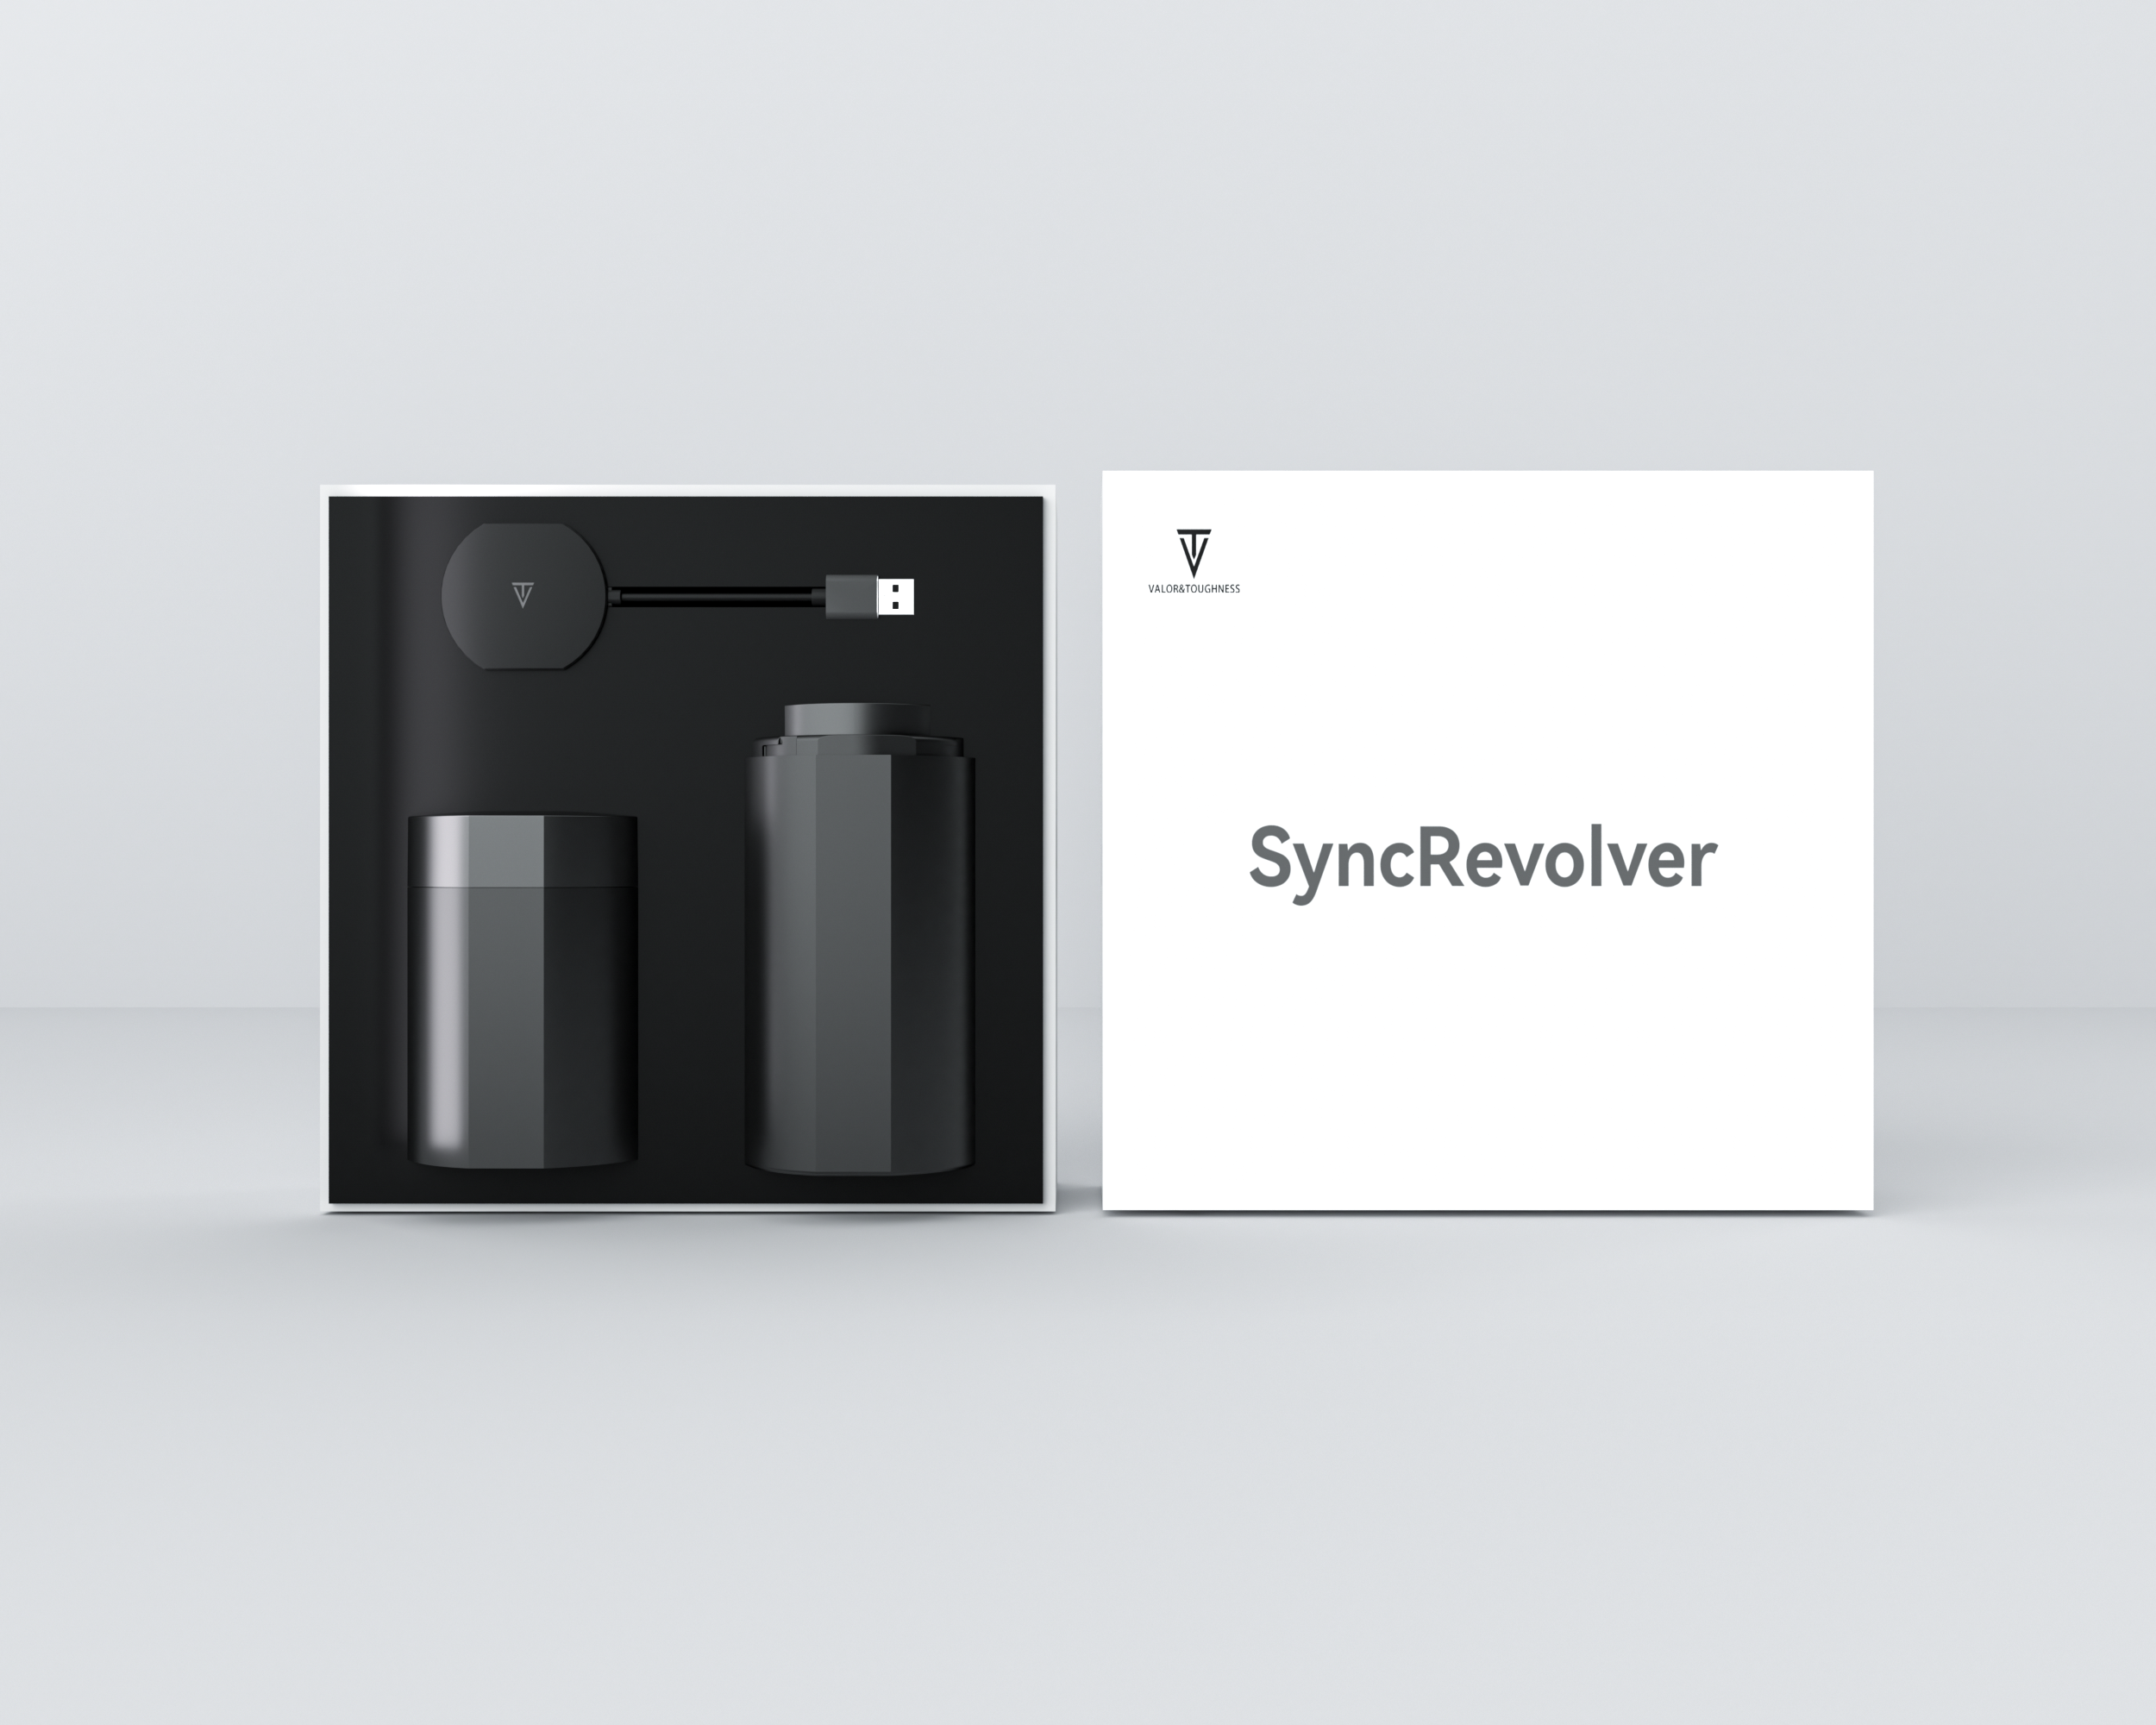 SyncRevolver   - Intense Rotational Stimulation that follows video actions